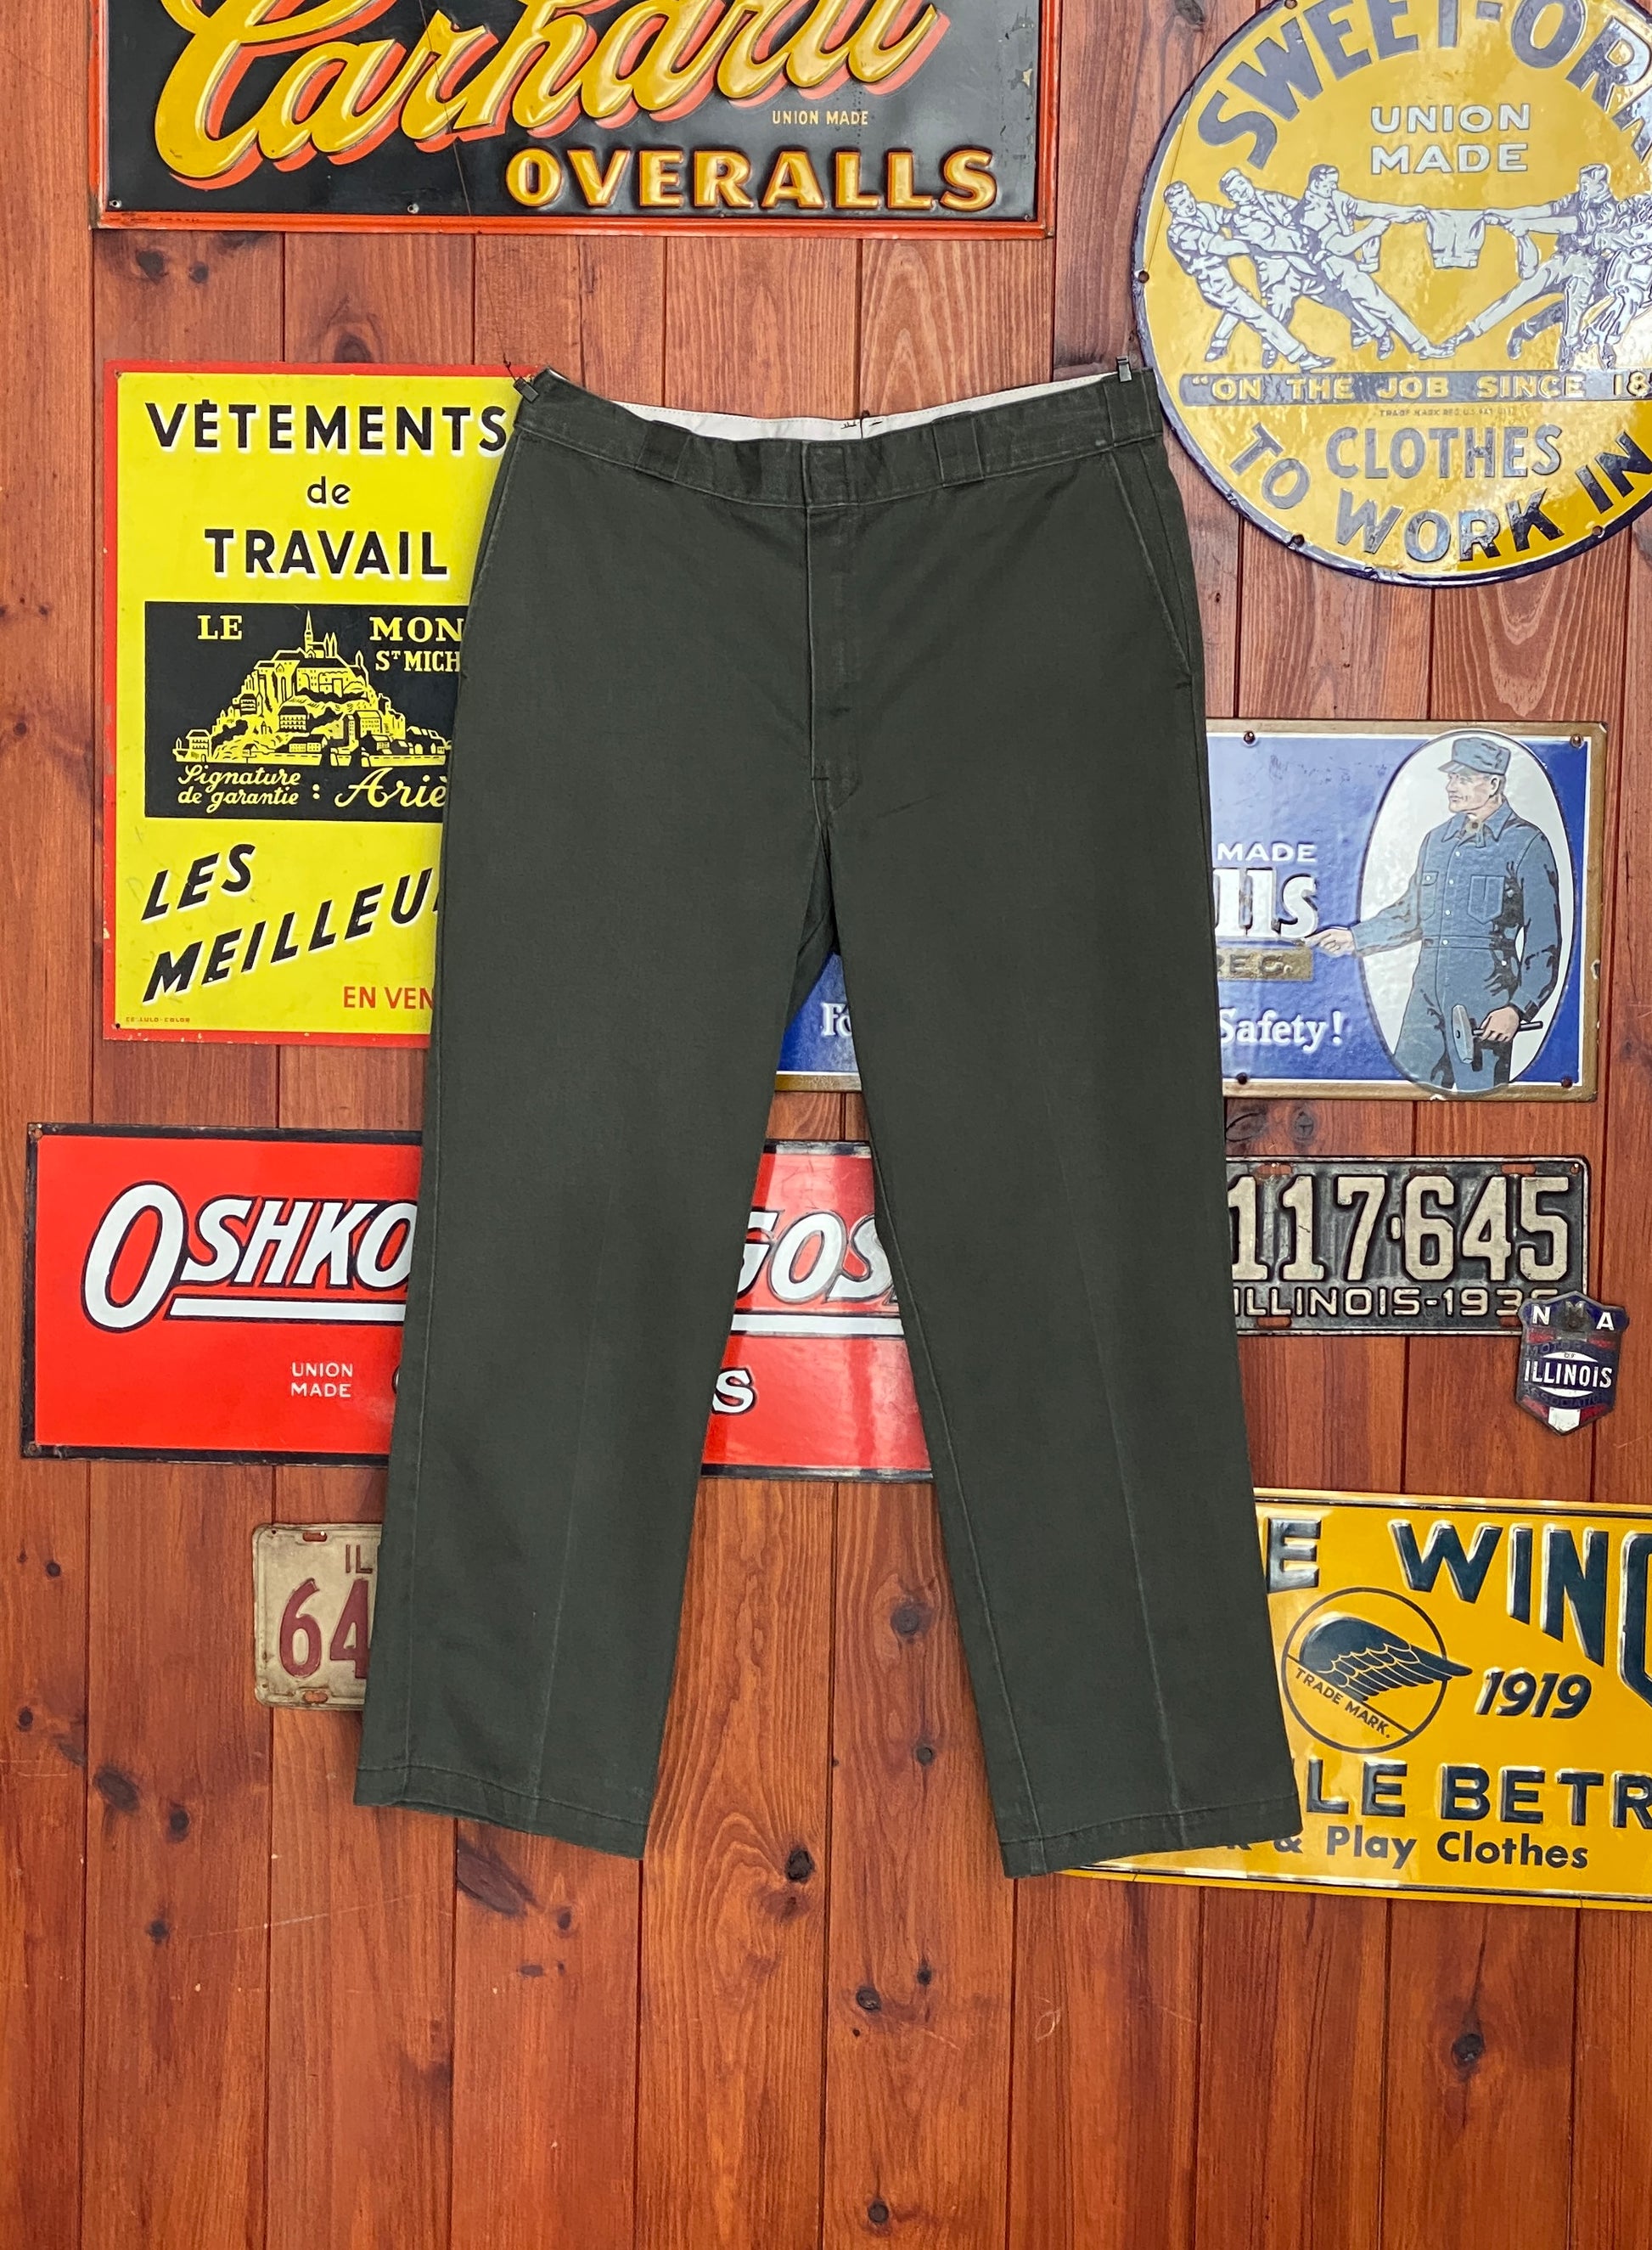 Green Vintage Dickies Pants Model 874 Size 38X30: Classic Workwear Apparel